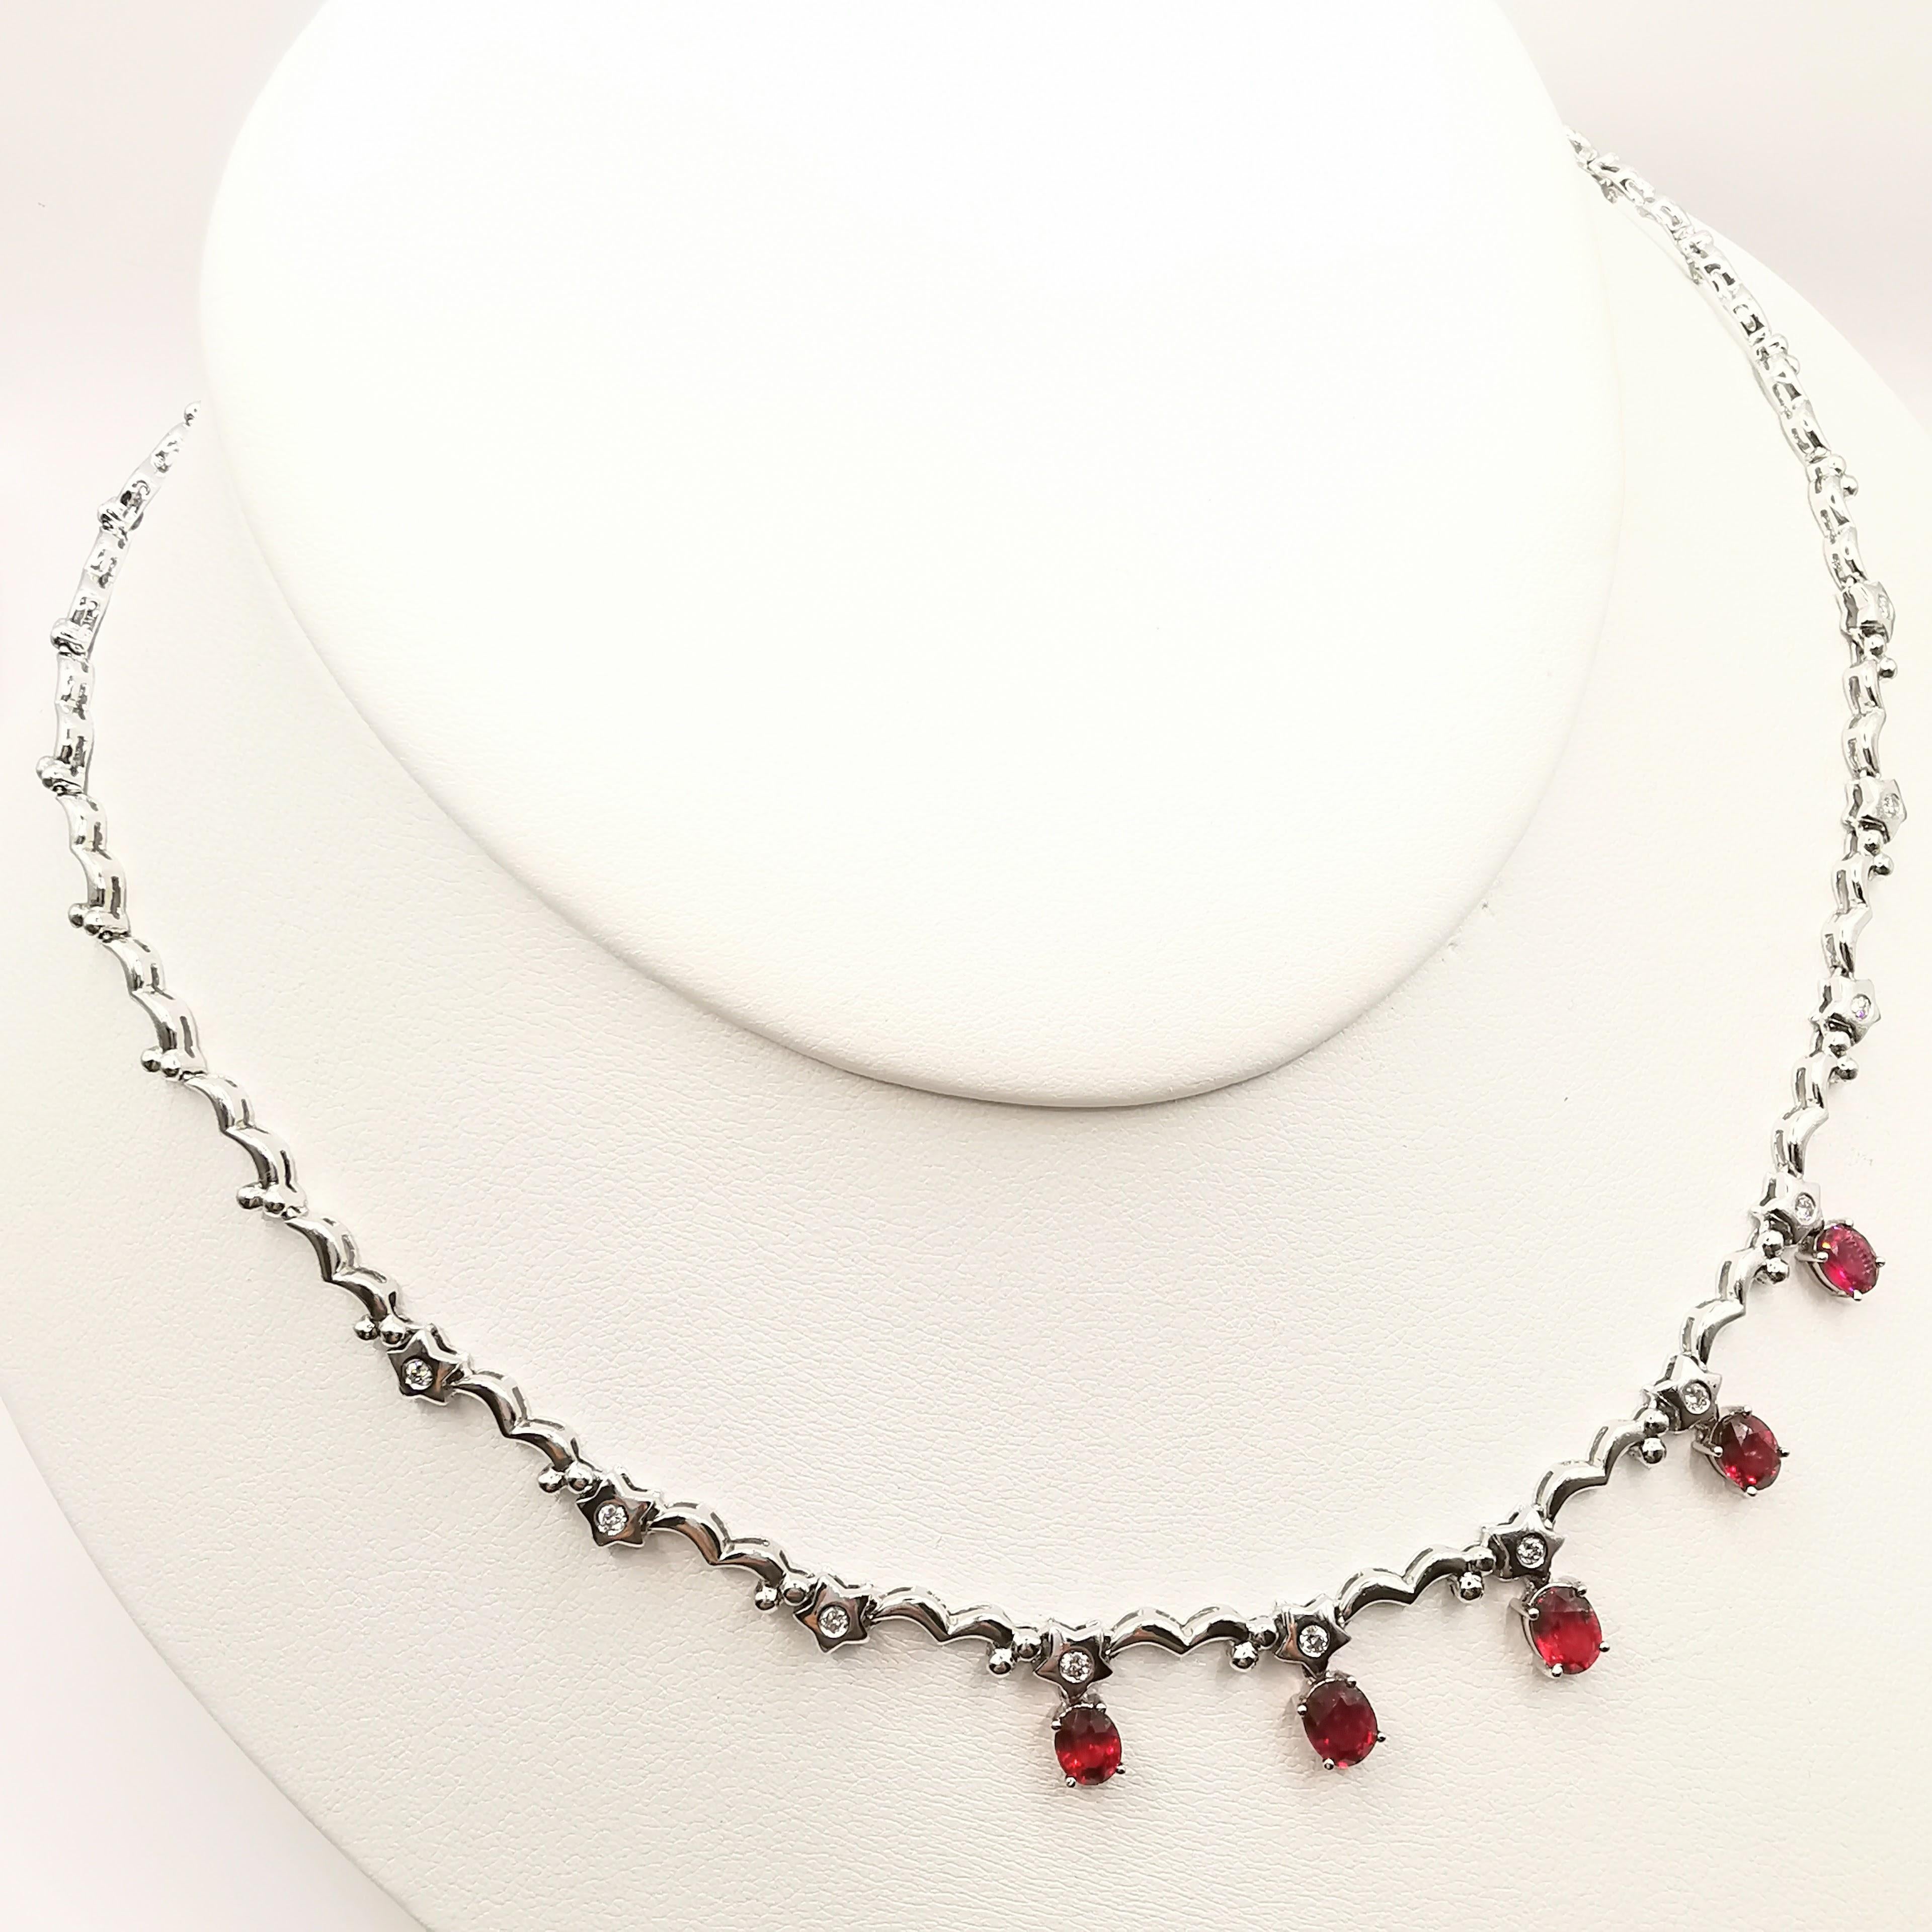 Contemporary 3.49ct Natural Oval Cut Pigeon Blood Ruby and Diamond Necklace in 18K White Gold For Sale